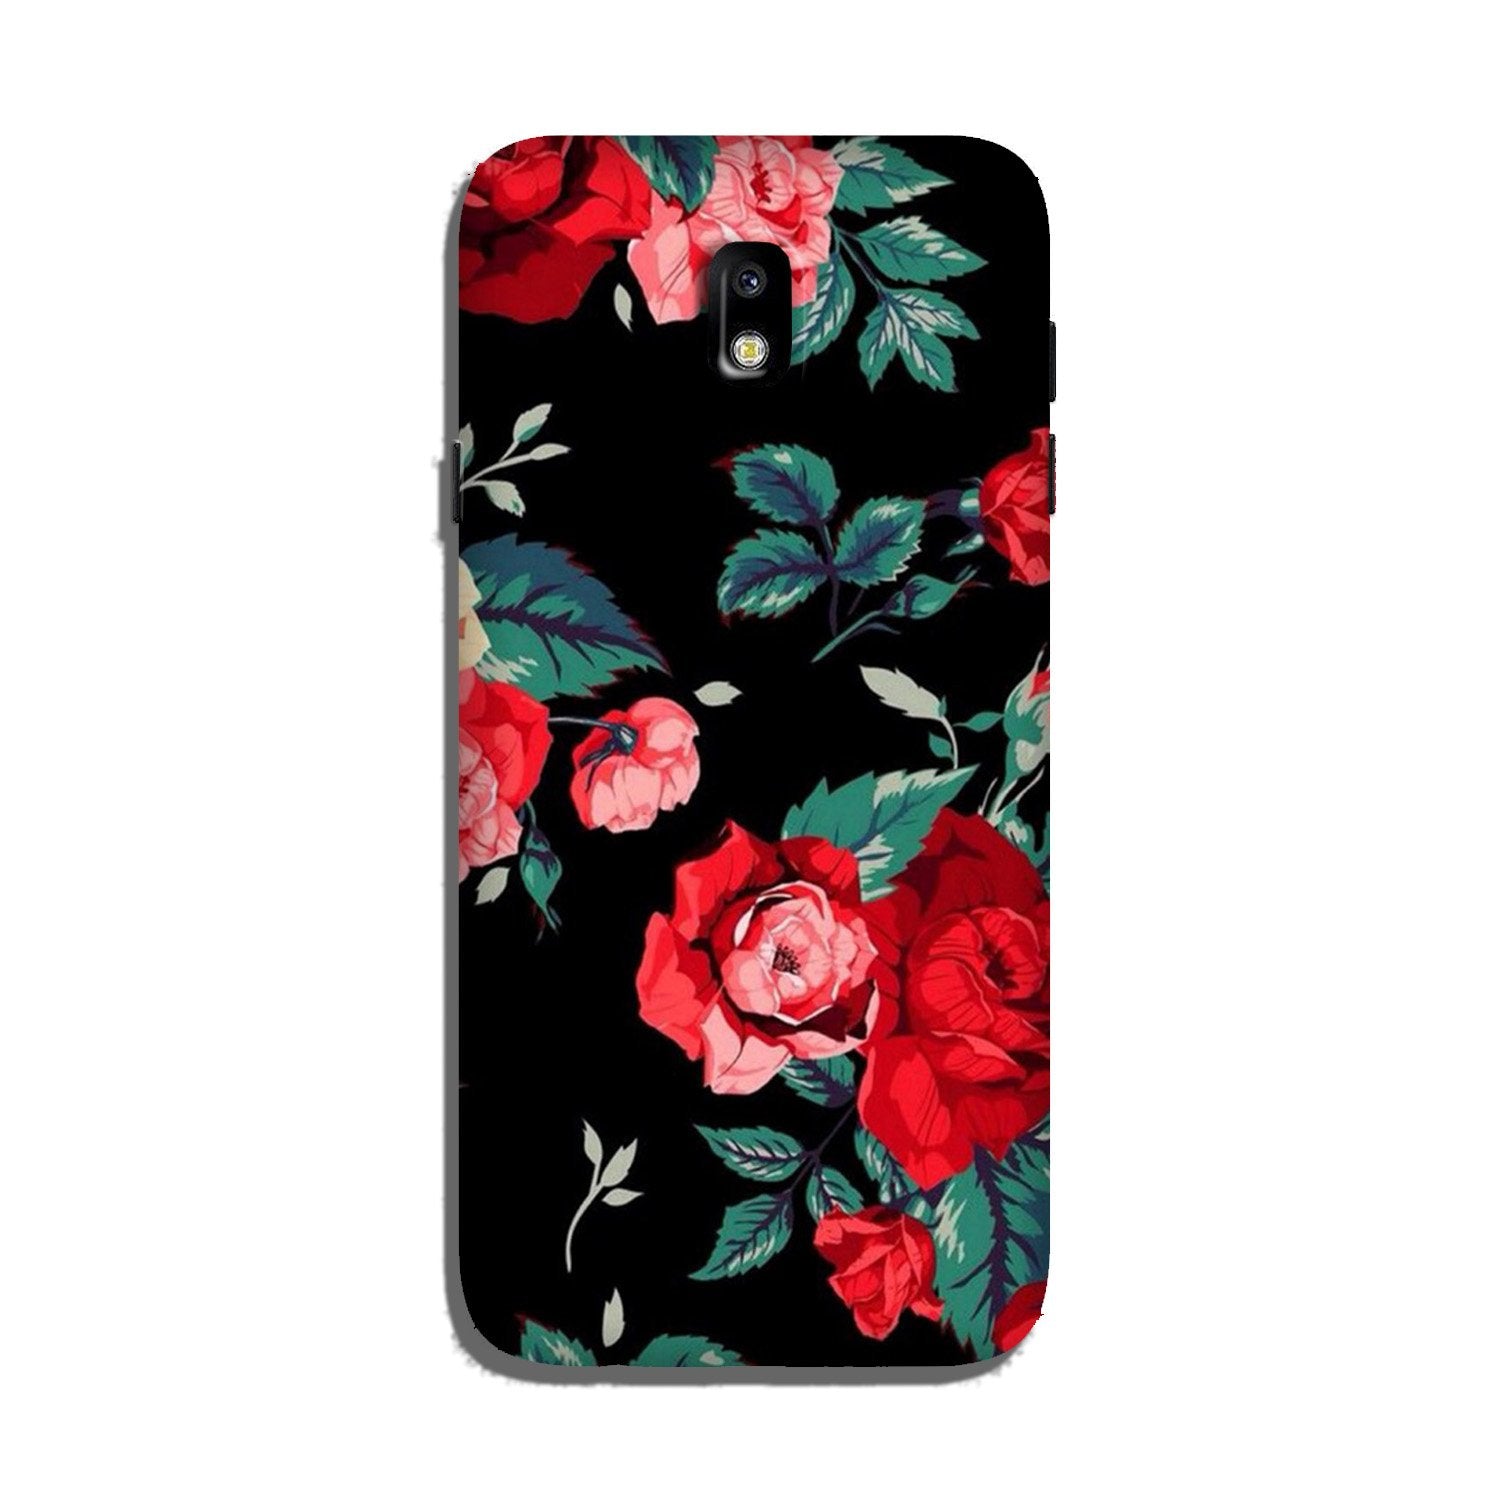 Red Rose2 Case for Galaxy J5 Pro